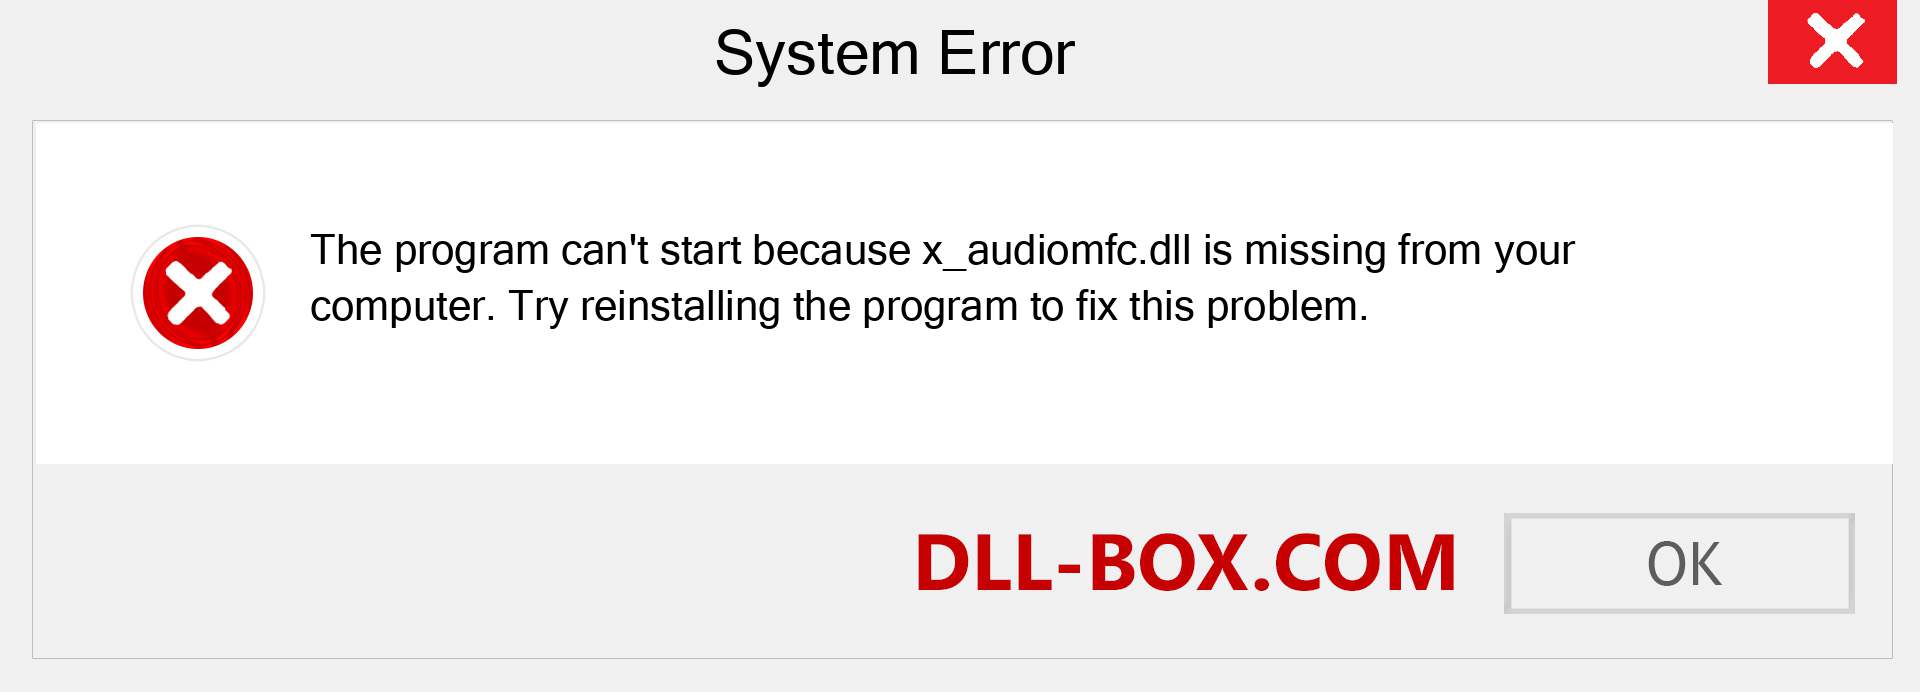  x_audiomfc.dll file is missing?. Download for Windows 7, 8, 10 - Fix  x_audiomfc dll Missing Error on Windows, photos, images